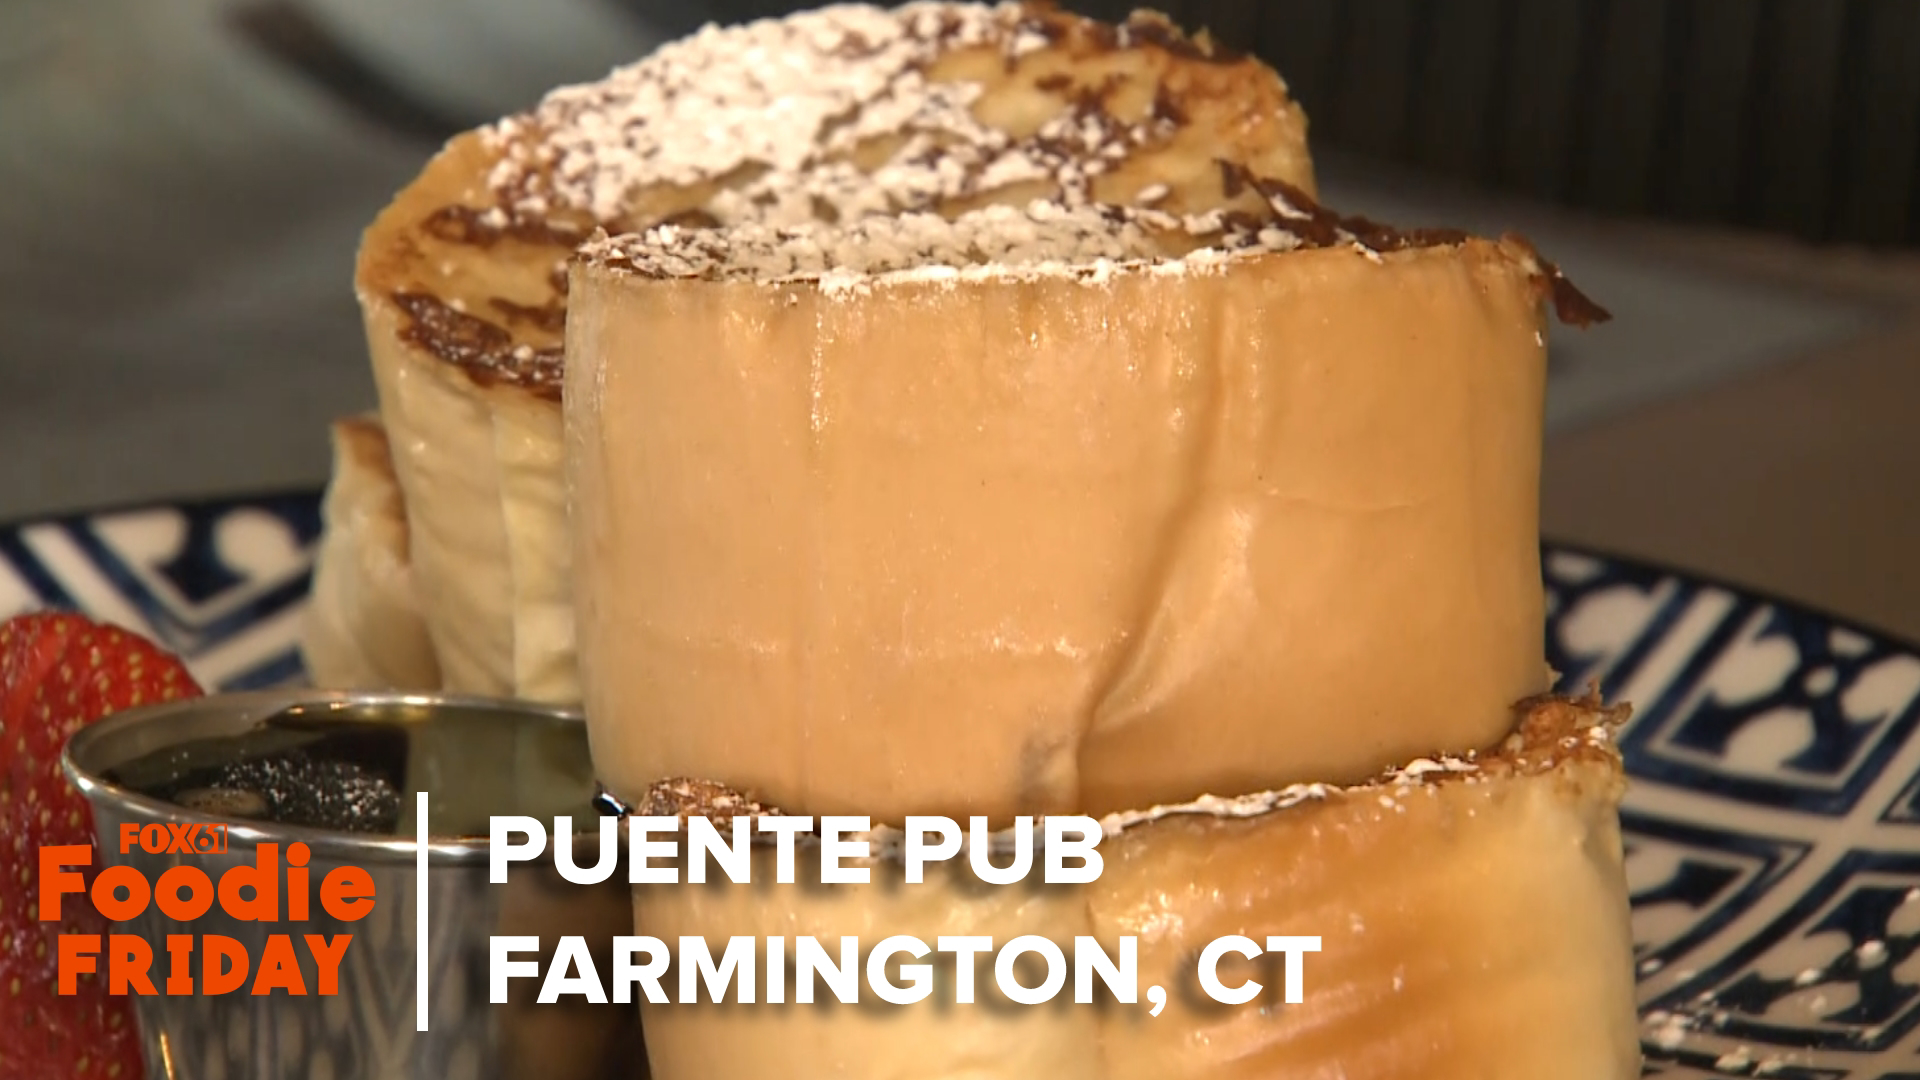 Puente serves Farmington, CT's Unionville neighborhood with the perfect fusion of Latino & Spanish cuisine with all-inclusive American food.